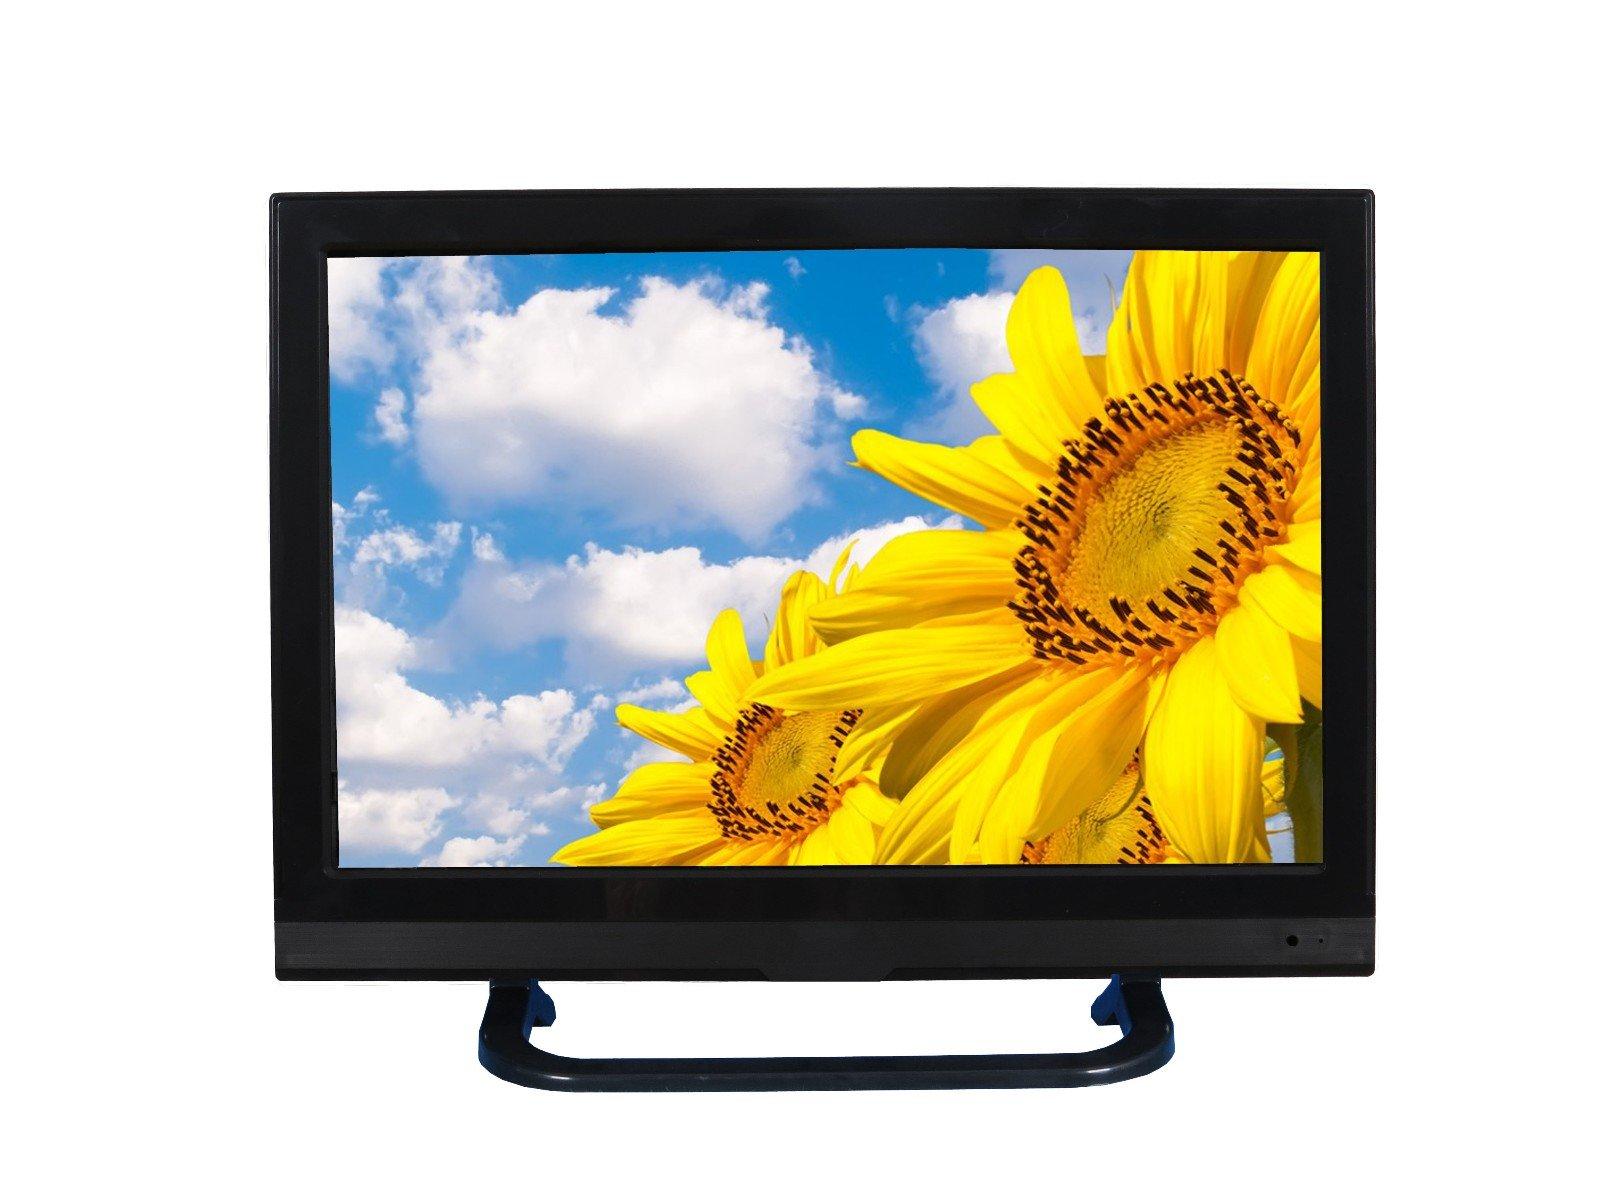 Xinyao LCD factory price 20 inch tv for sale manufacturer for lcd tv screen